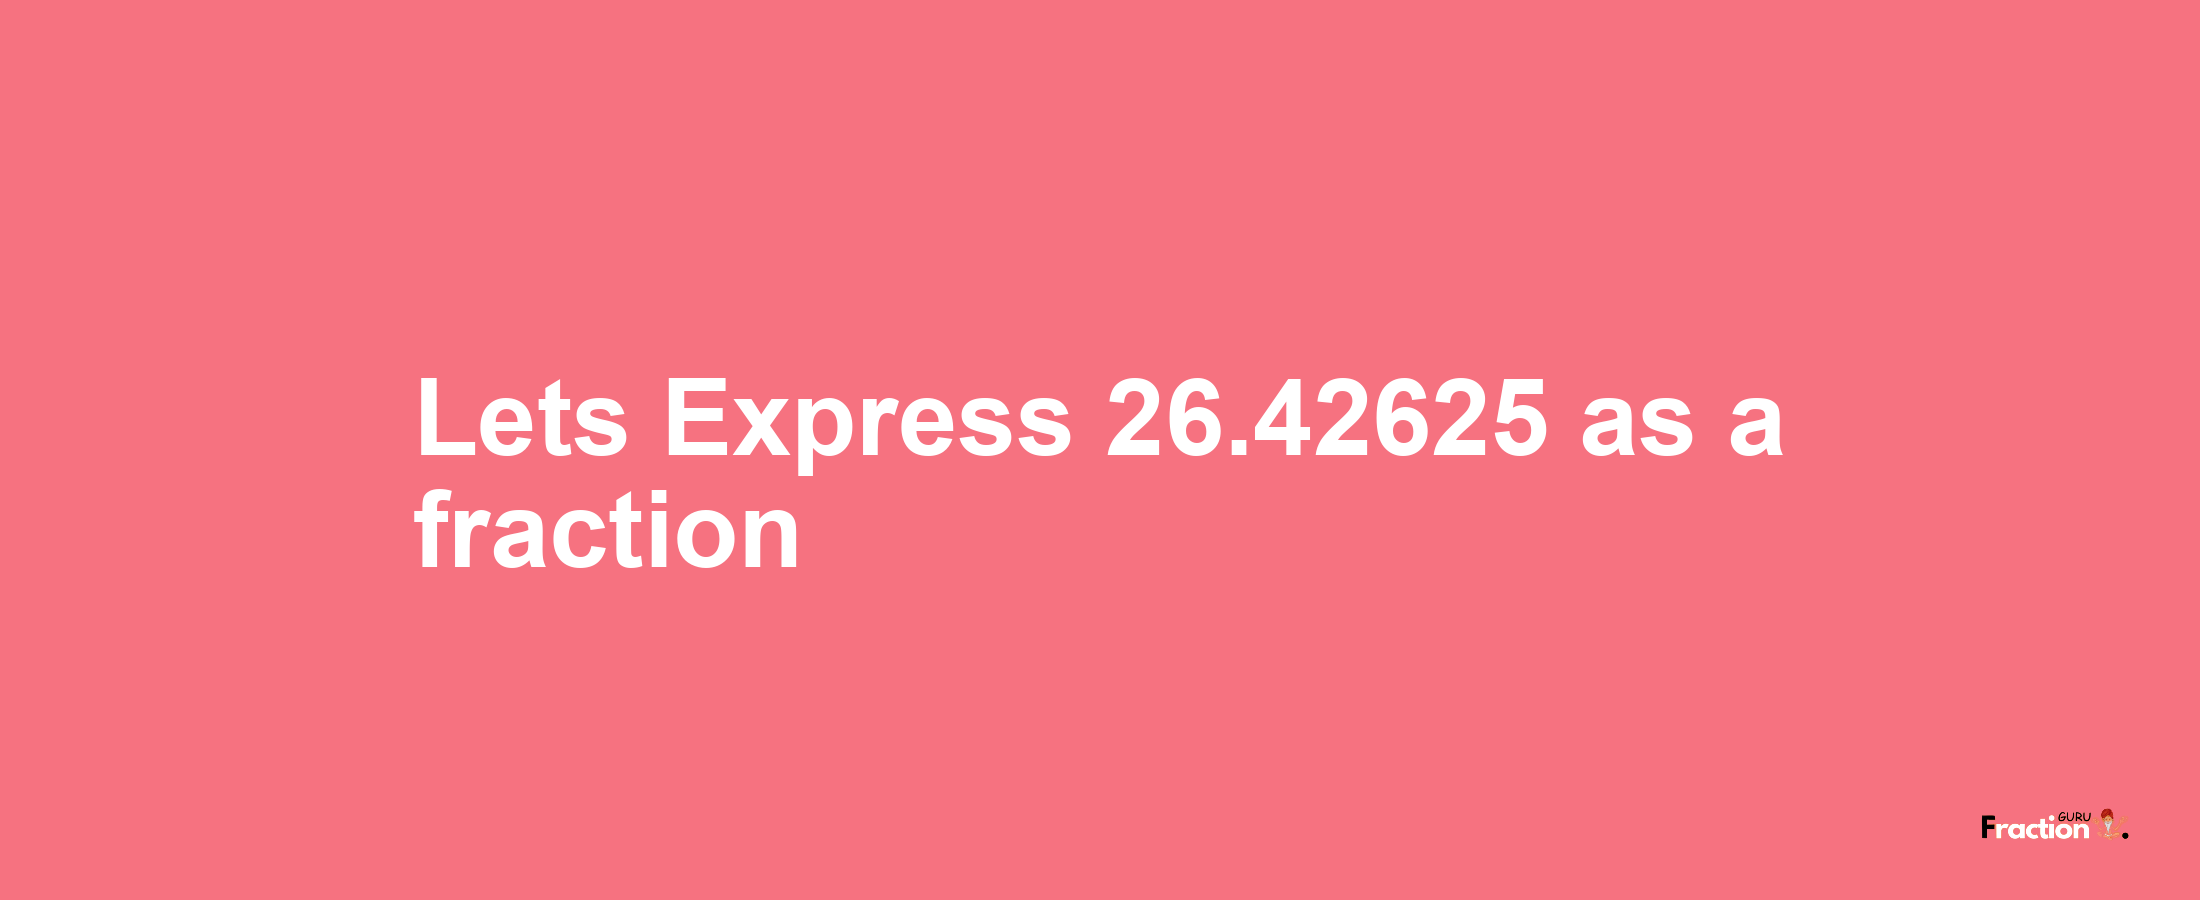 Lets Express 26.42625 as afraction